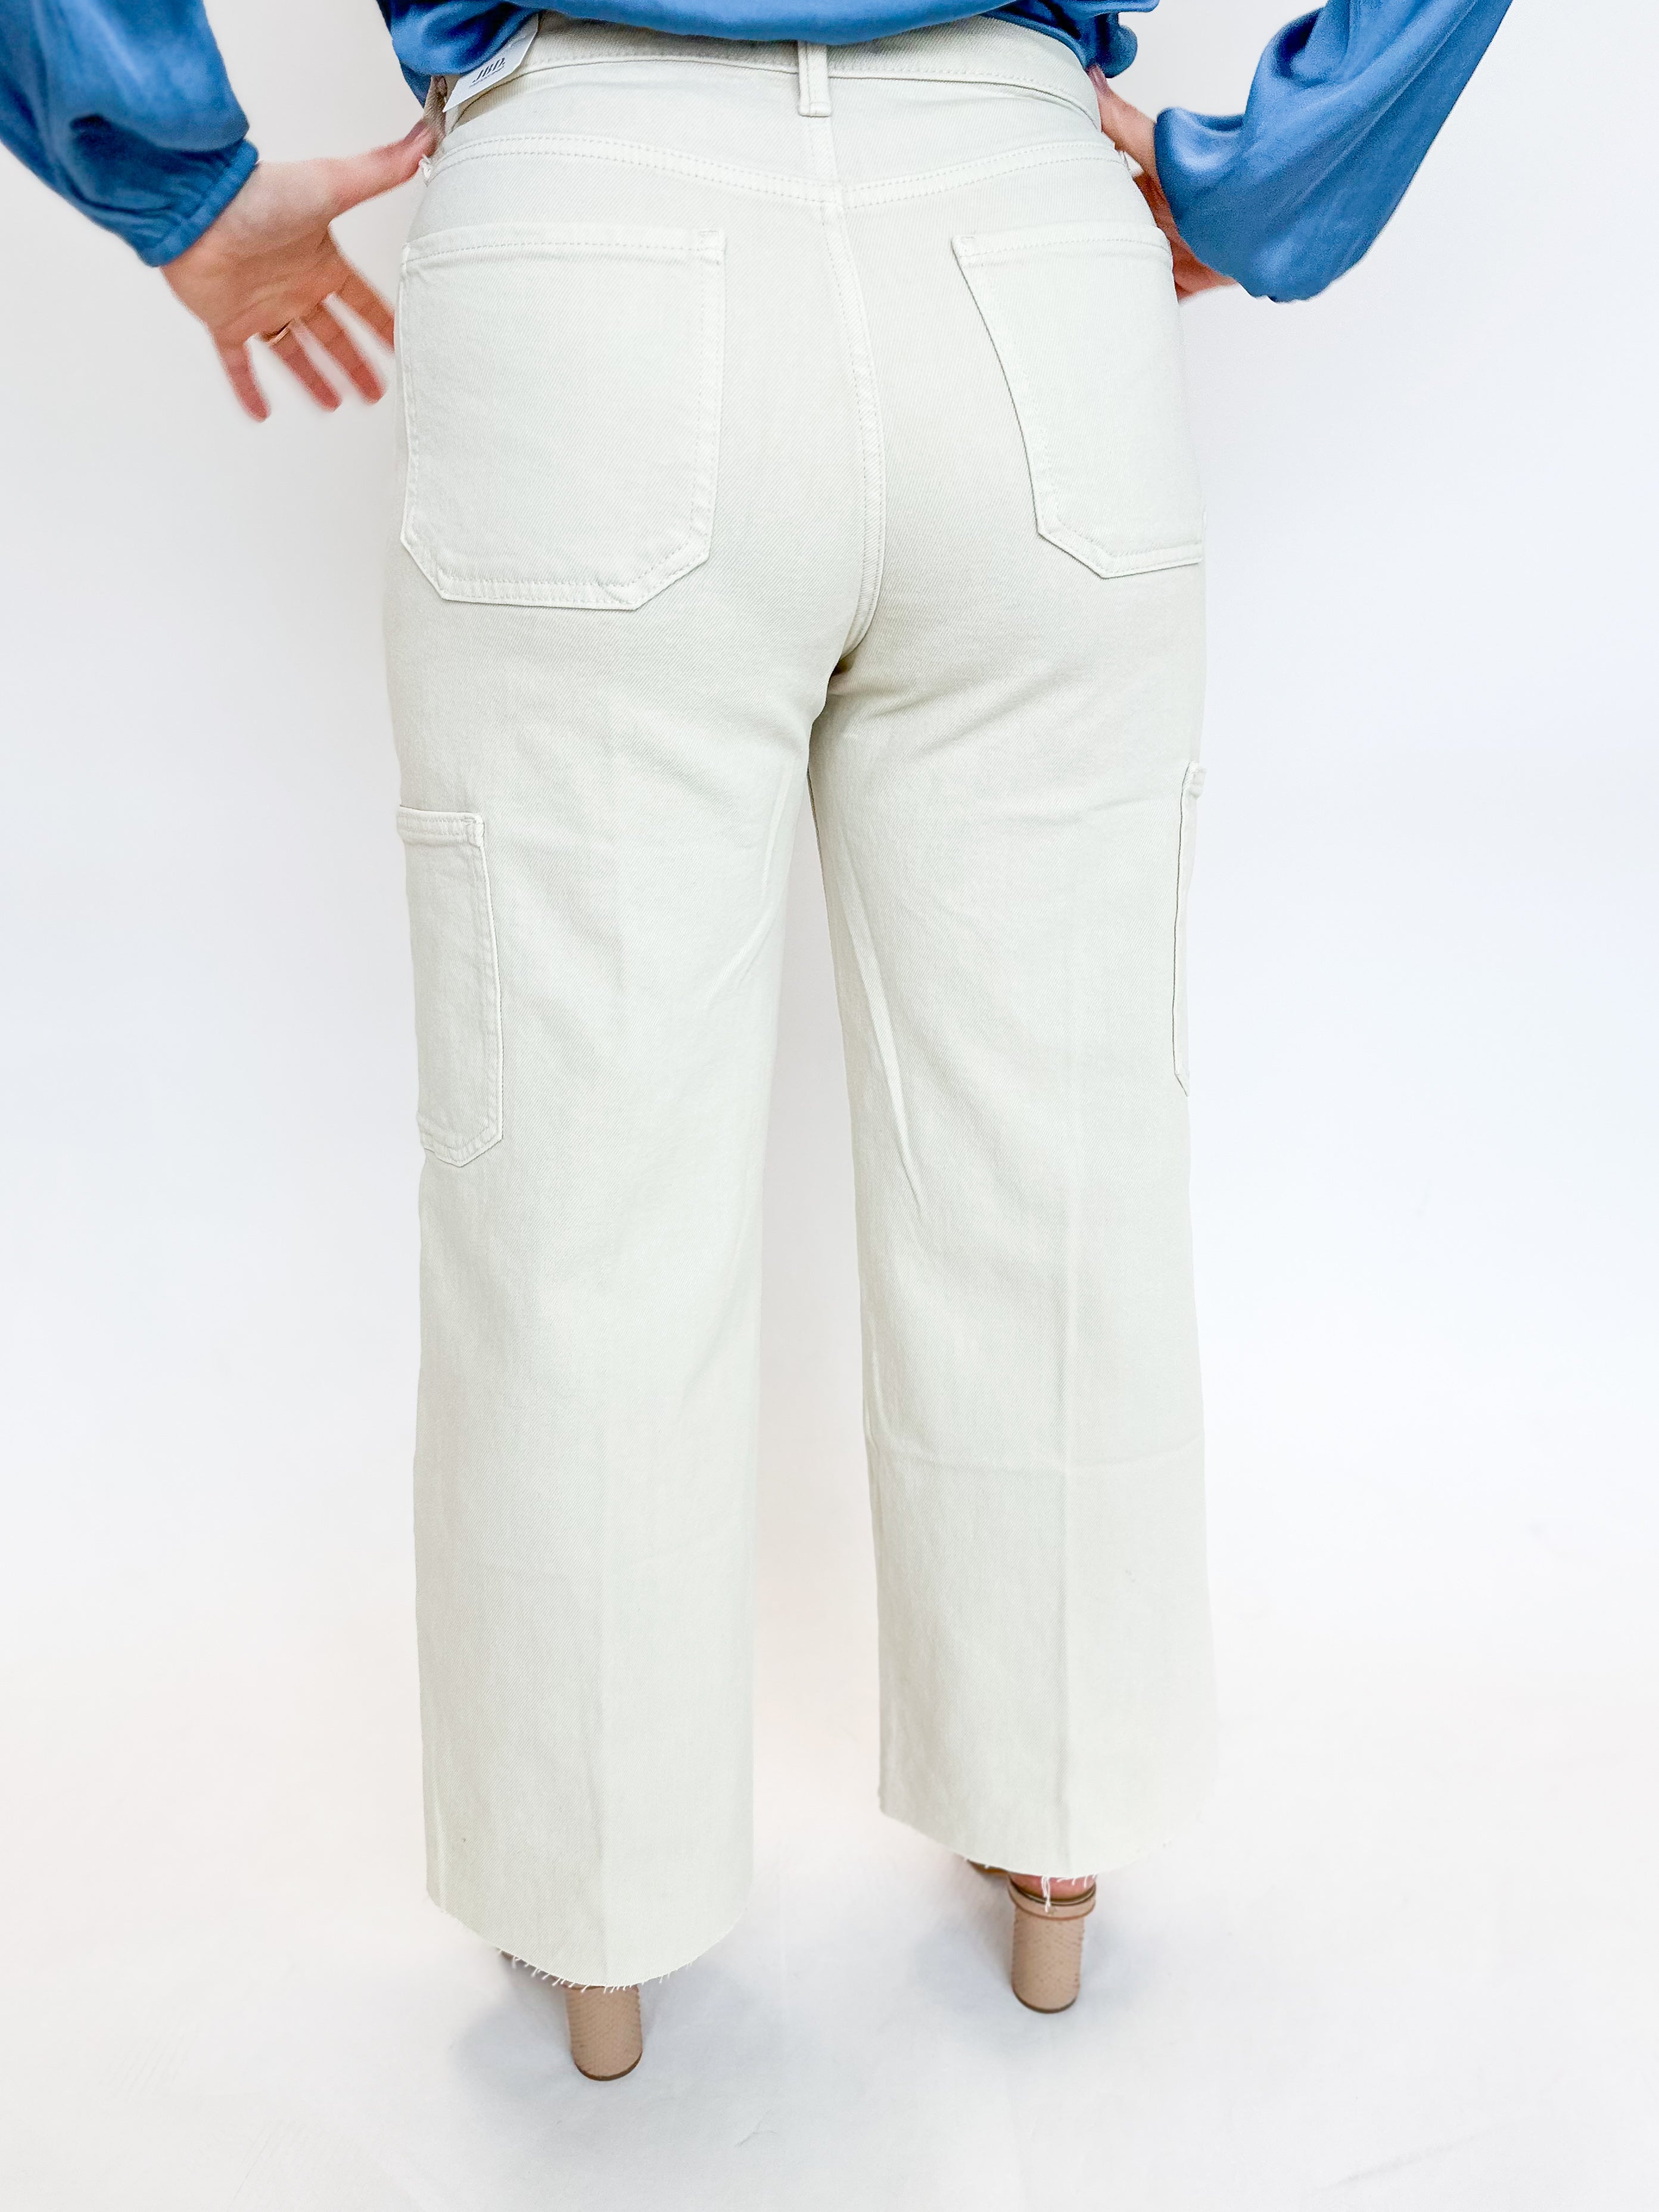 Oat Cargo Jeans-400 Pants-JUST USA-July & June Women's Fashion Boutique Located in San Antonio, Texas